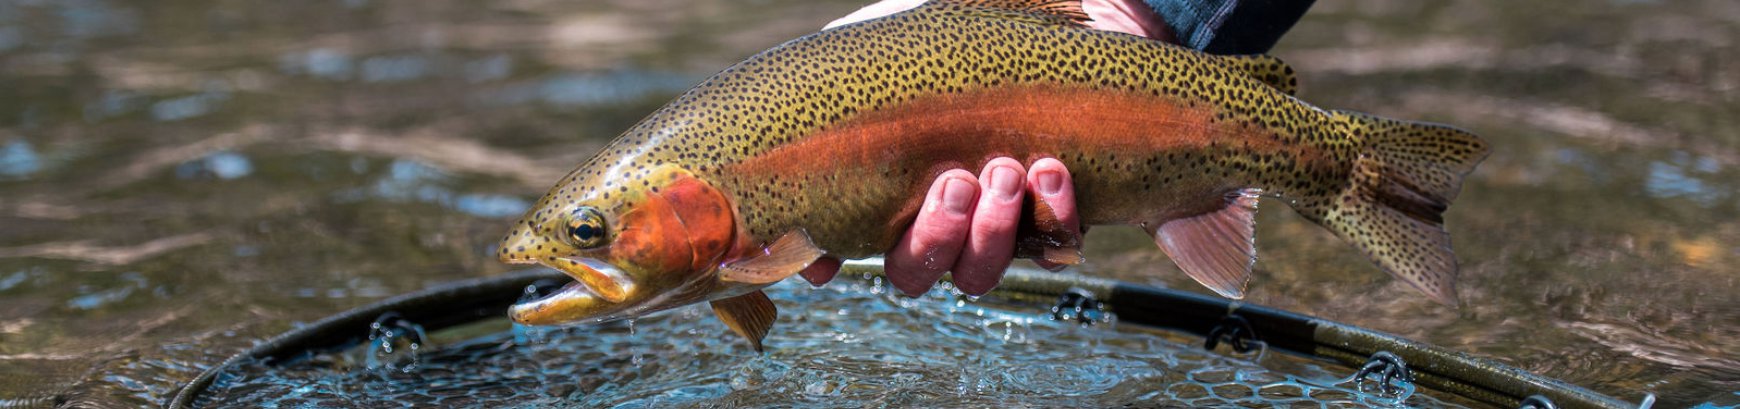 Deckers Dry Fly Fishing - Colorado Trout Hunters